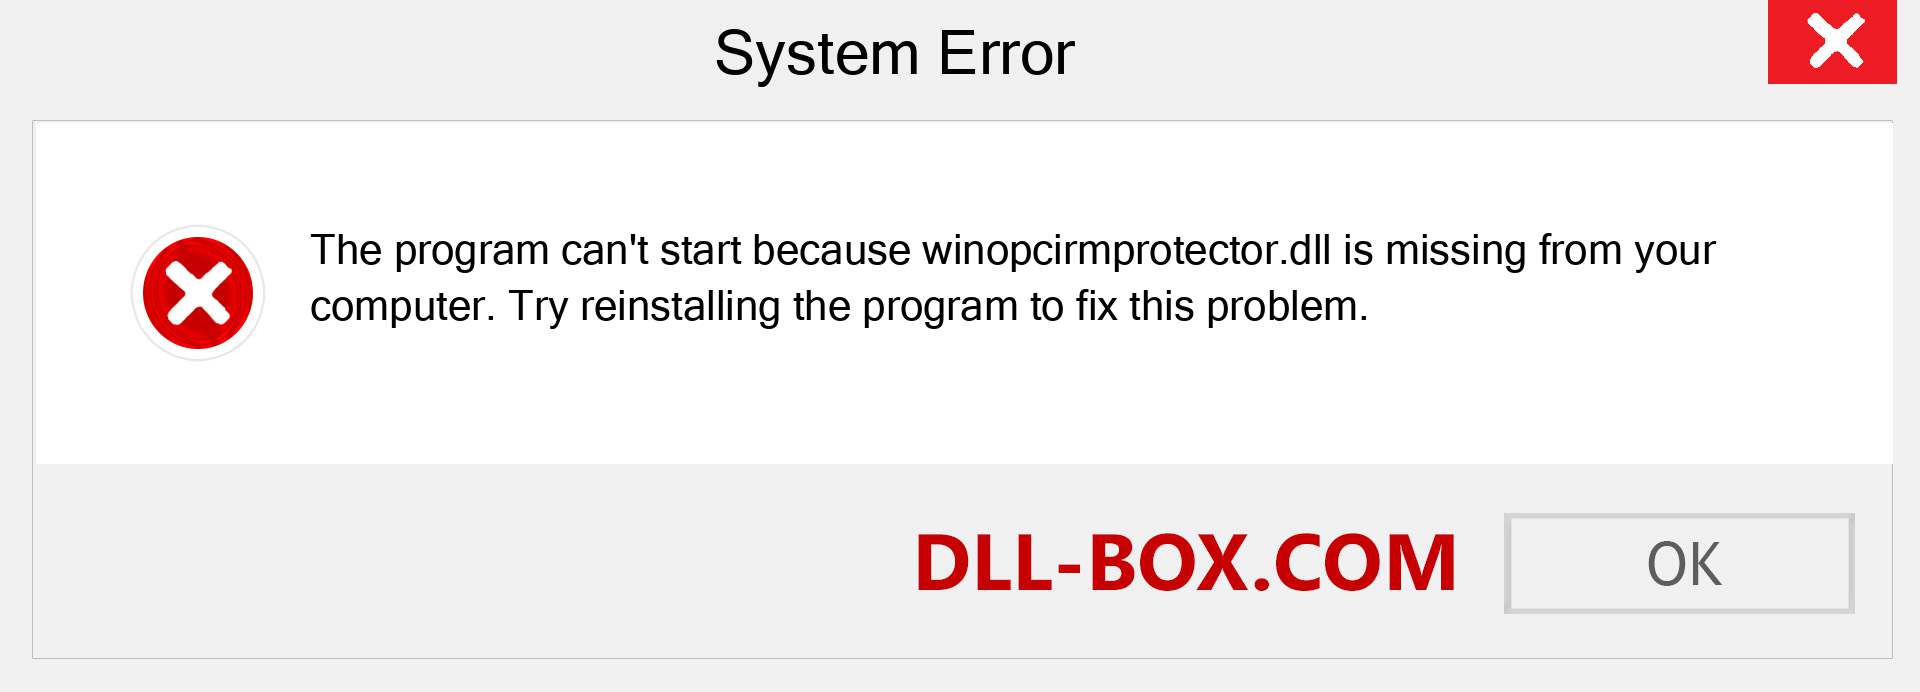  winopcirmprotector.dll file is missing?. Download for Windows 7, 8, 10 - Fix  winopcirmprotector dll Missing Error on Windows, photos, images